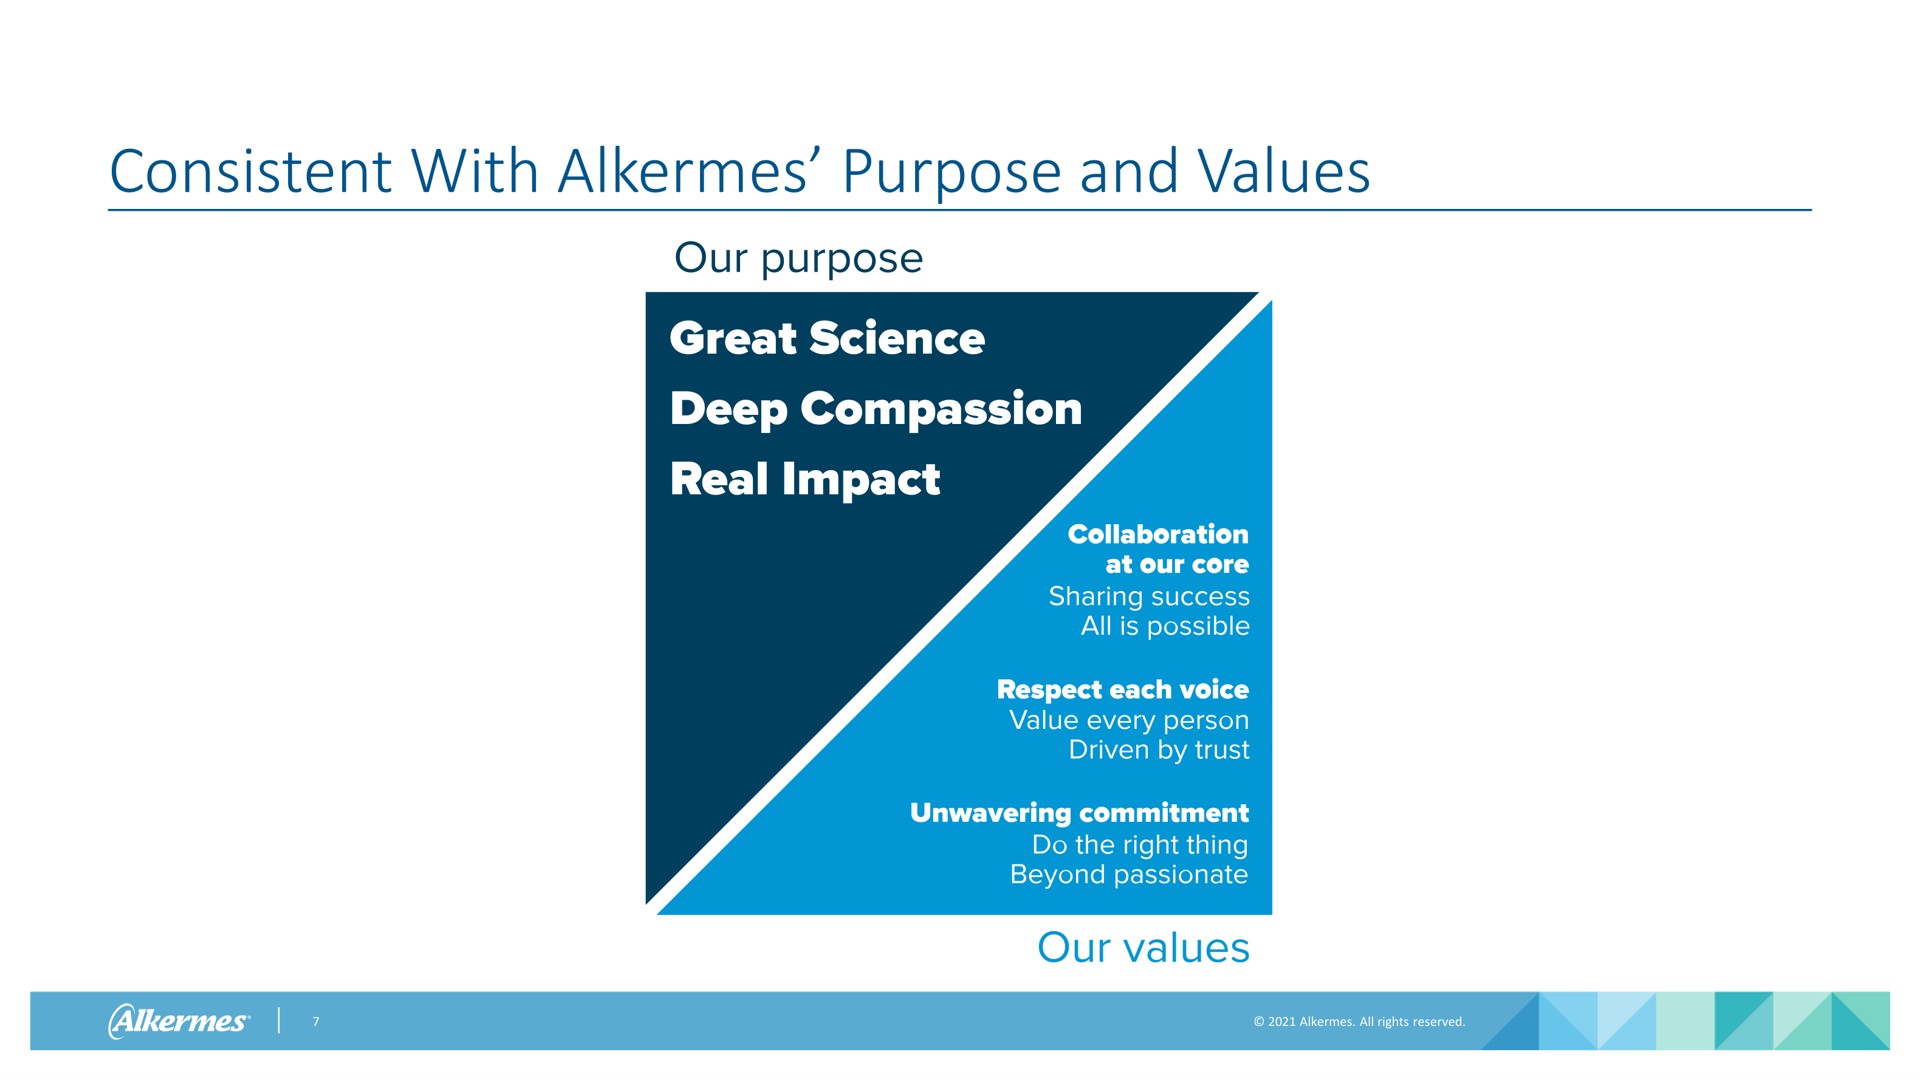 consistent with alkermes purpose and values our great science deep compassion real impact collaboration at our core sharing success all is possible beyond passionate respect each voice value every person driven by trust unwavering commitment do the right thing our | Alkermes